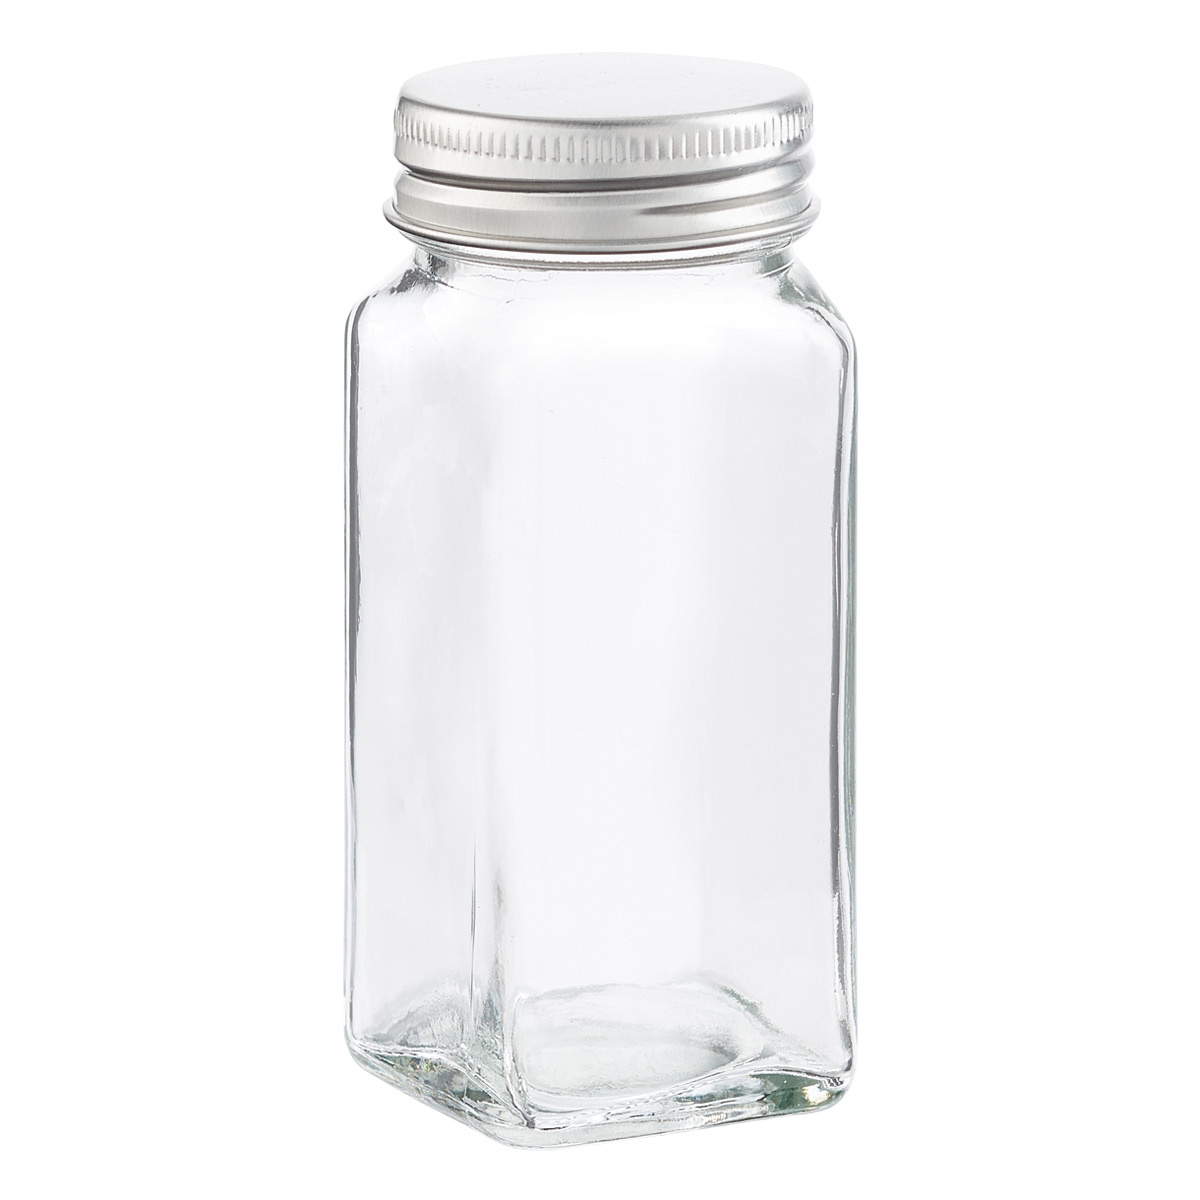 3 oz. Square Spice Jar with Aluminum Lid | The Container Store